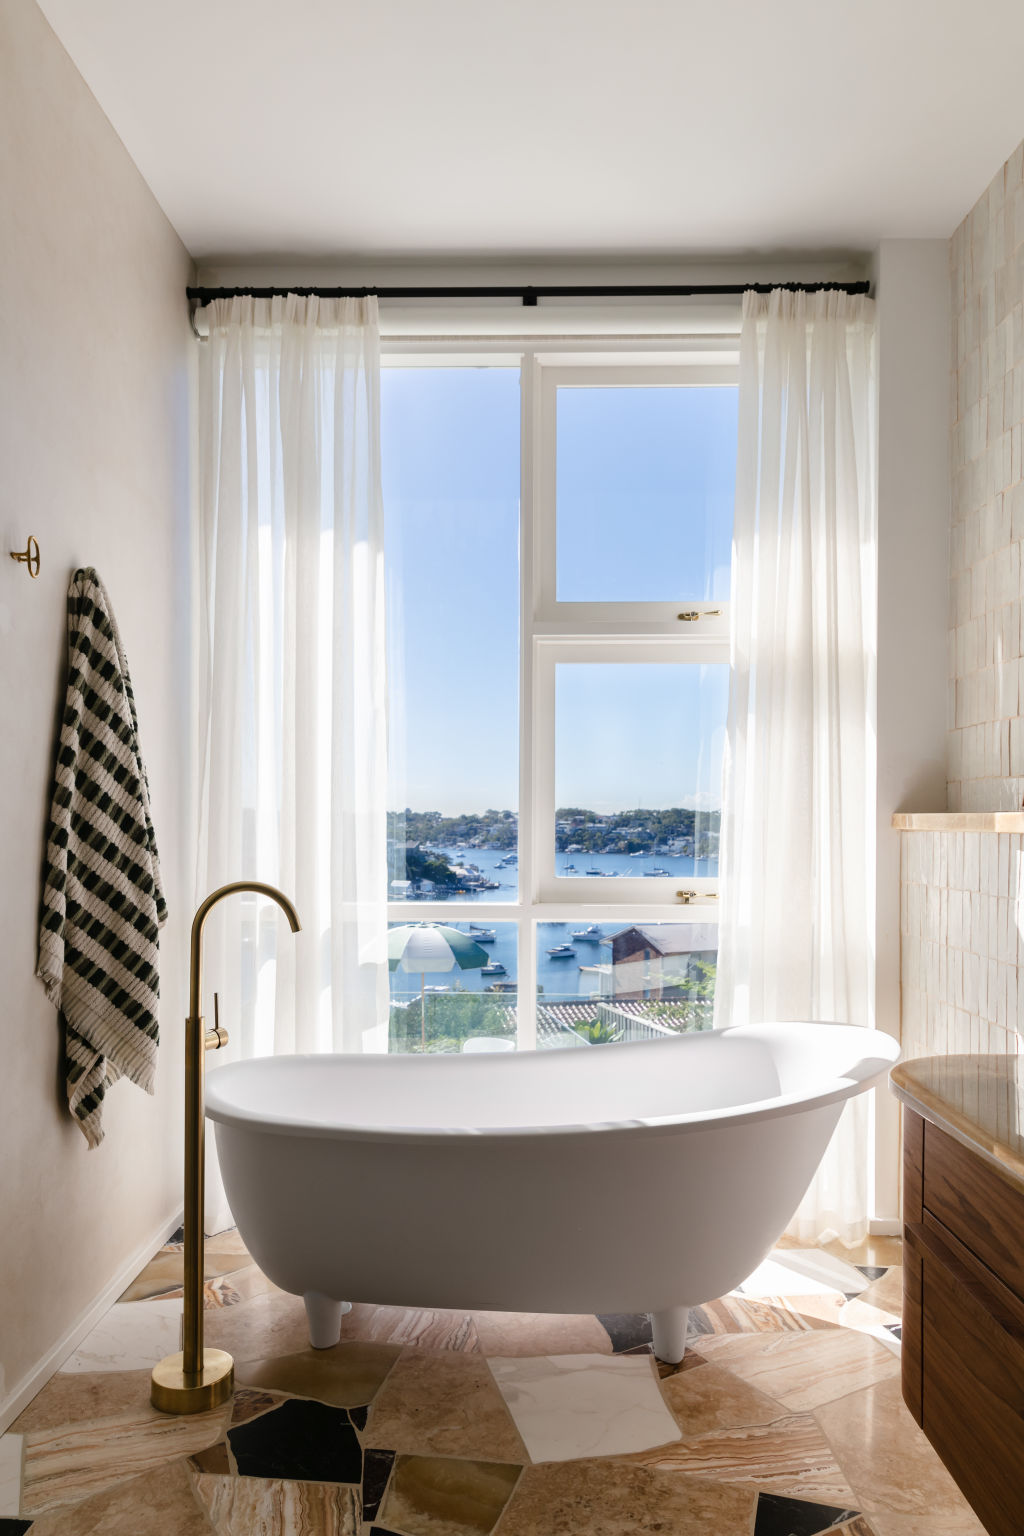 The Palladiana-style marble-offcut flooring stars in Jones’ en suite, and so does that view. Photo: Trudy Pagden